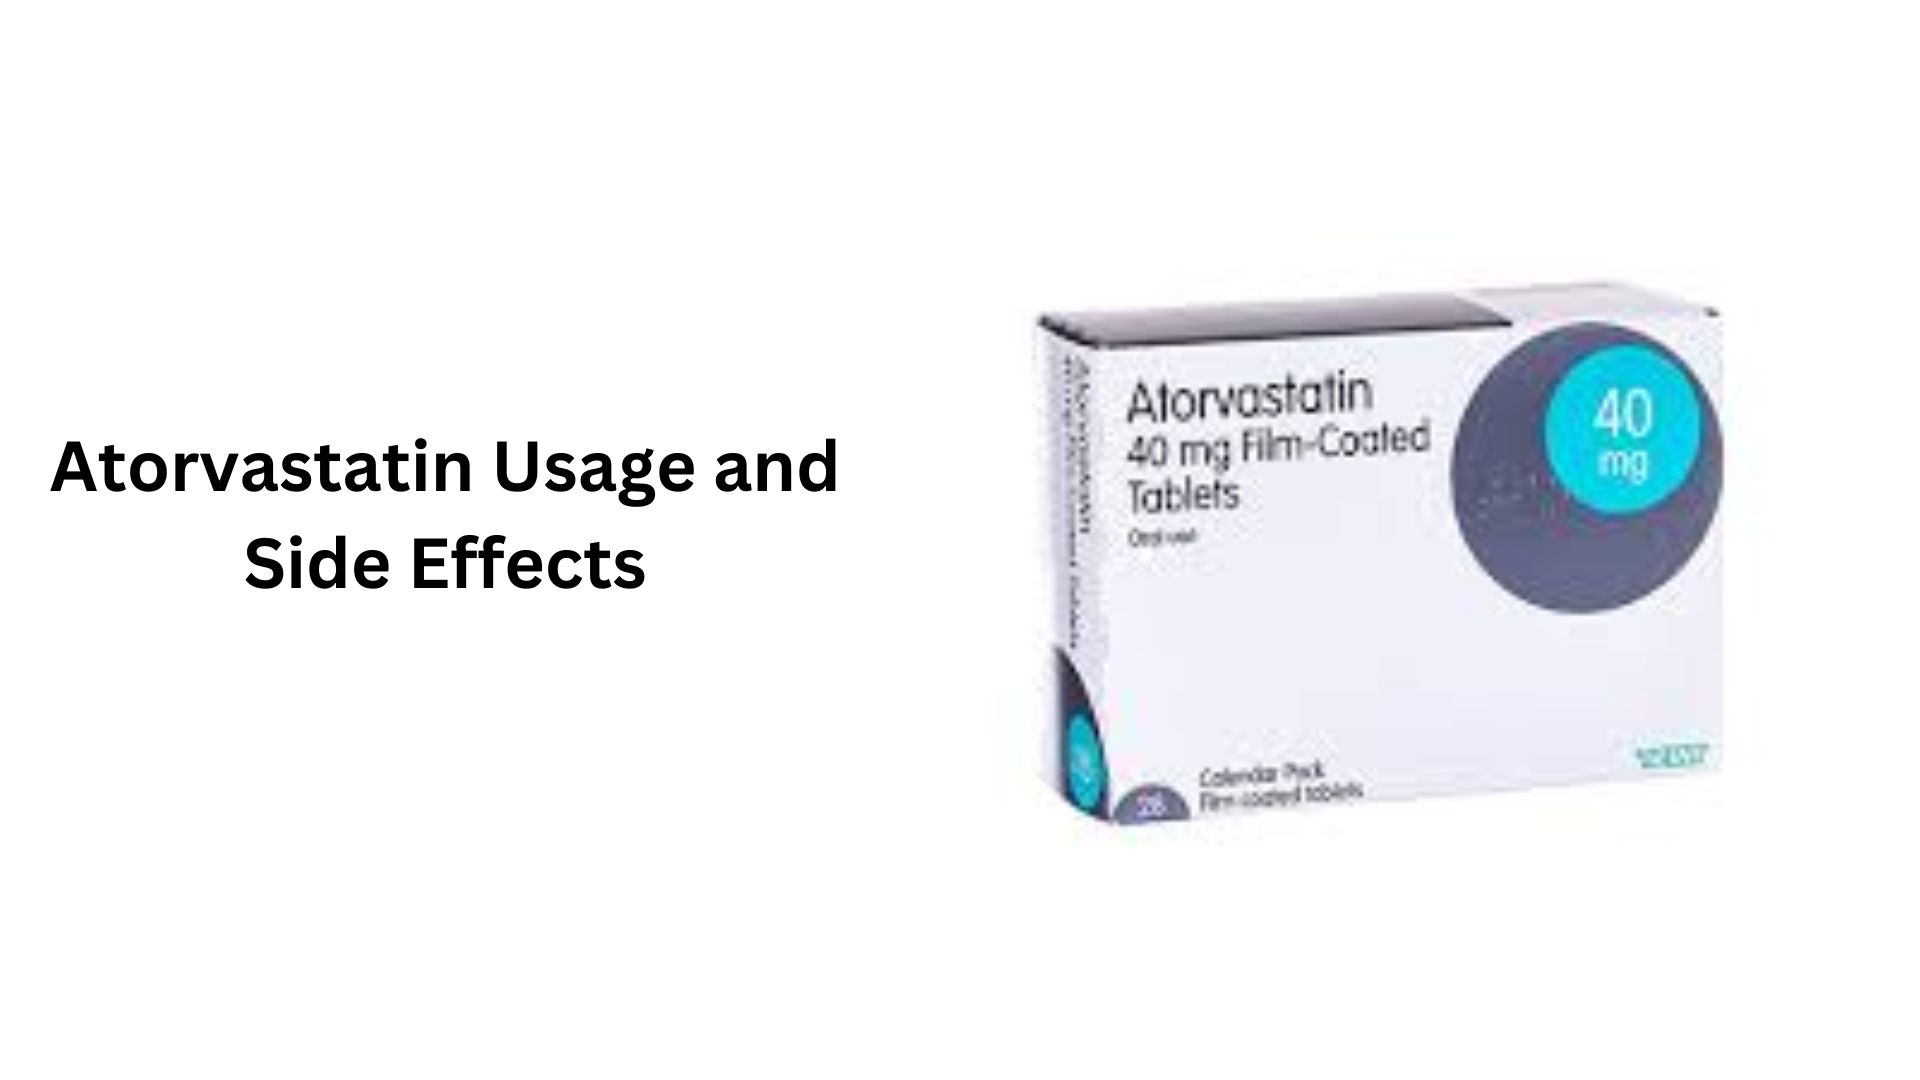 Atorvastatin Usage and Side Effects